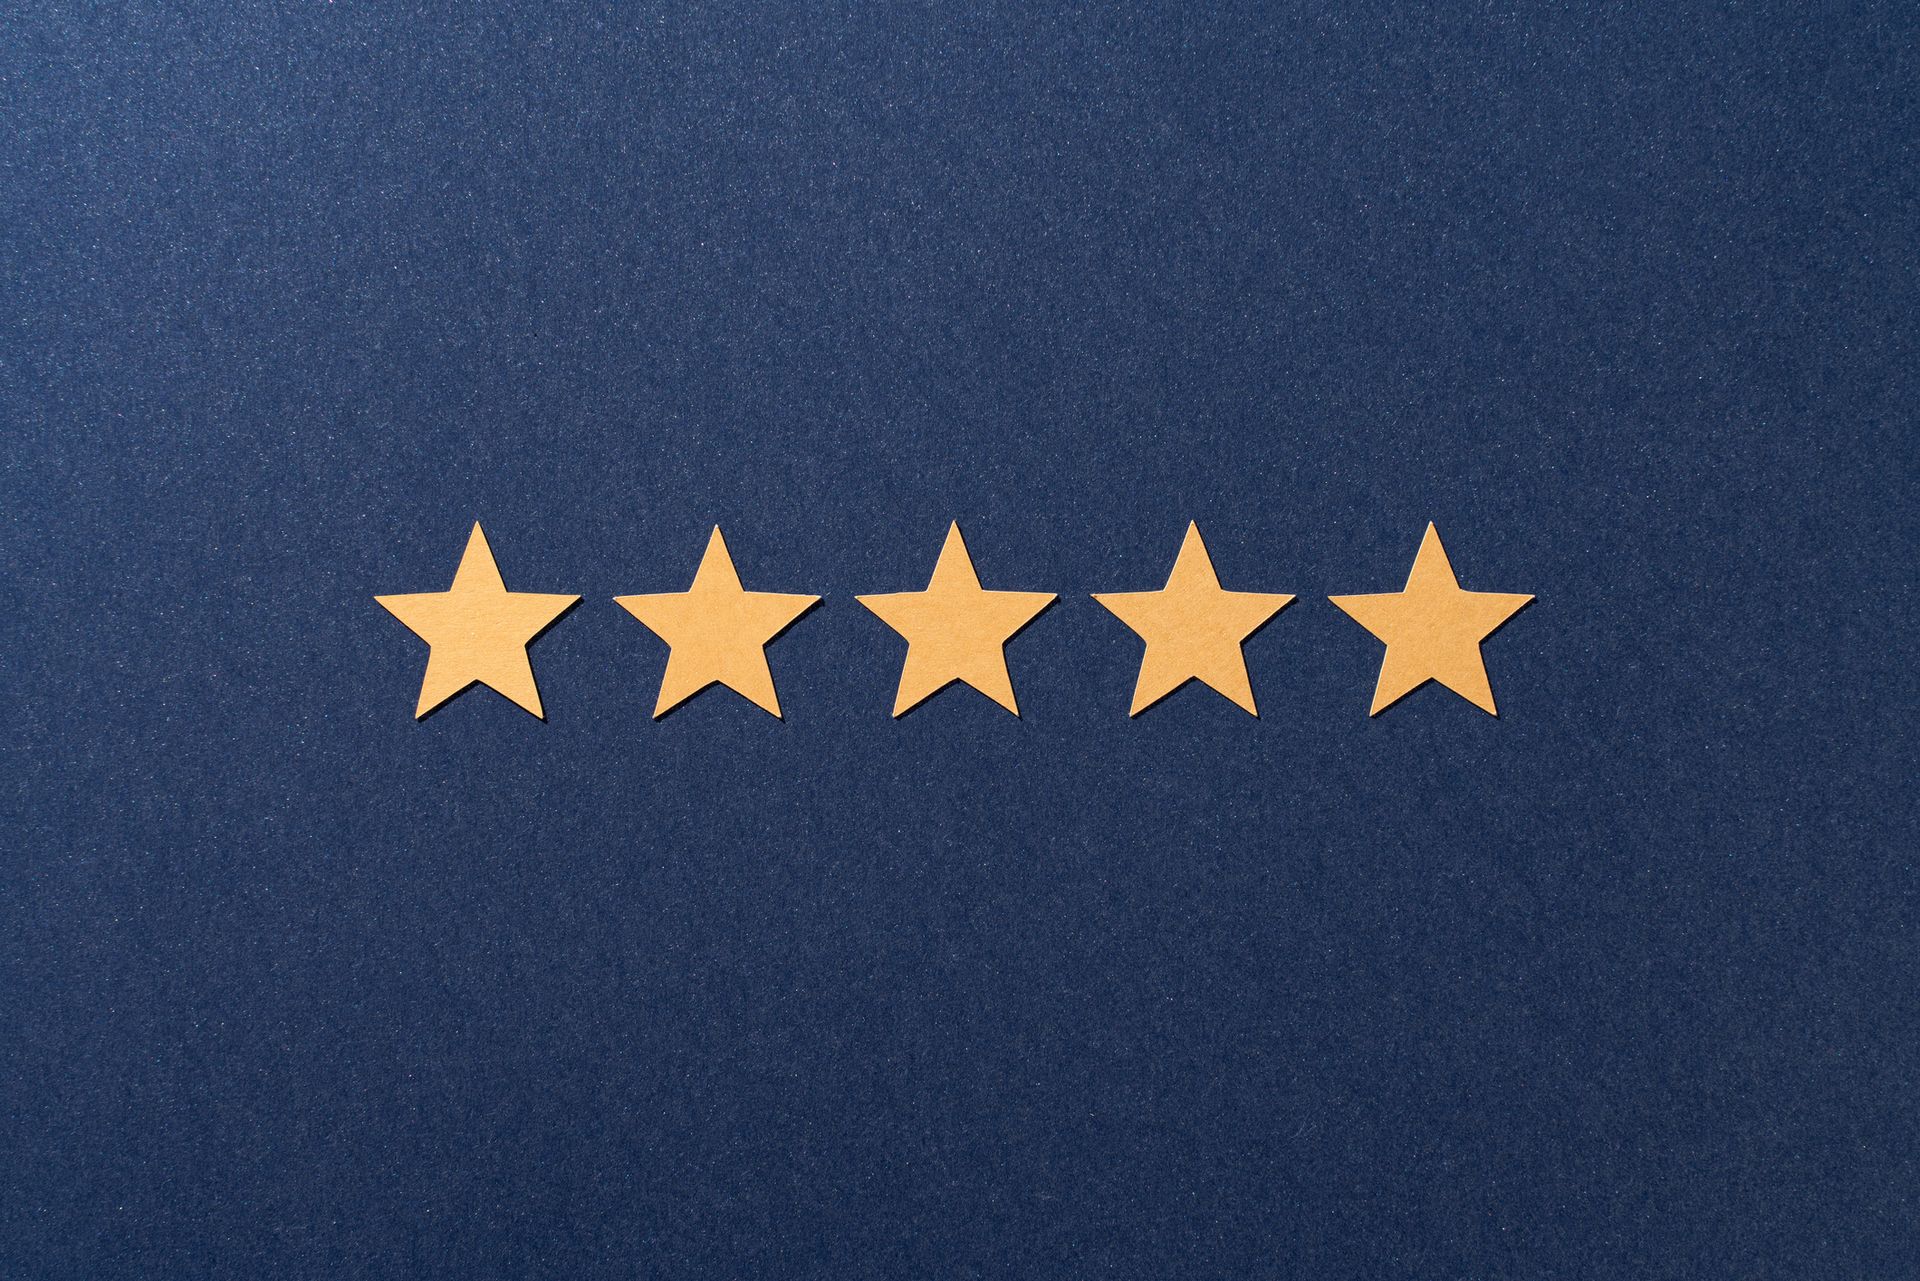 Five Gold Stars on a Dark Blue Background - Conneaut, OH - Severes Towing